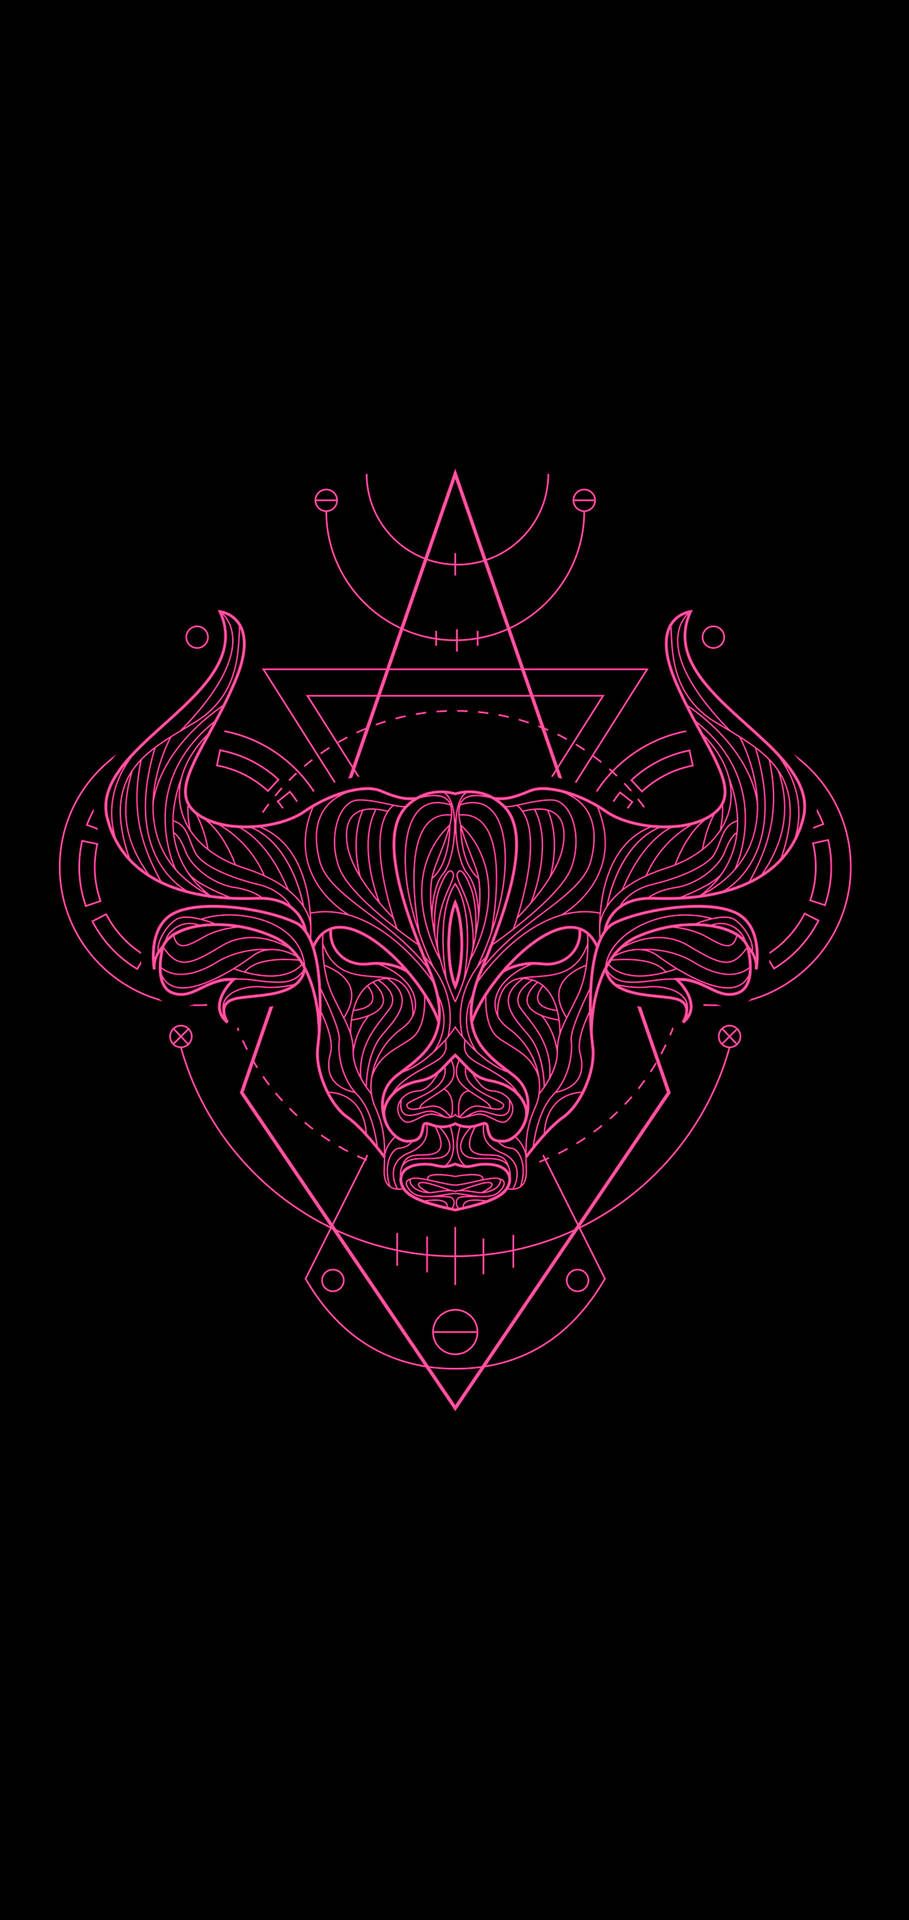 IPhone wallpaper of a bull in neon pink on a black background - Taurus